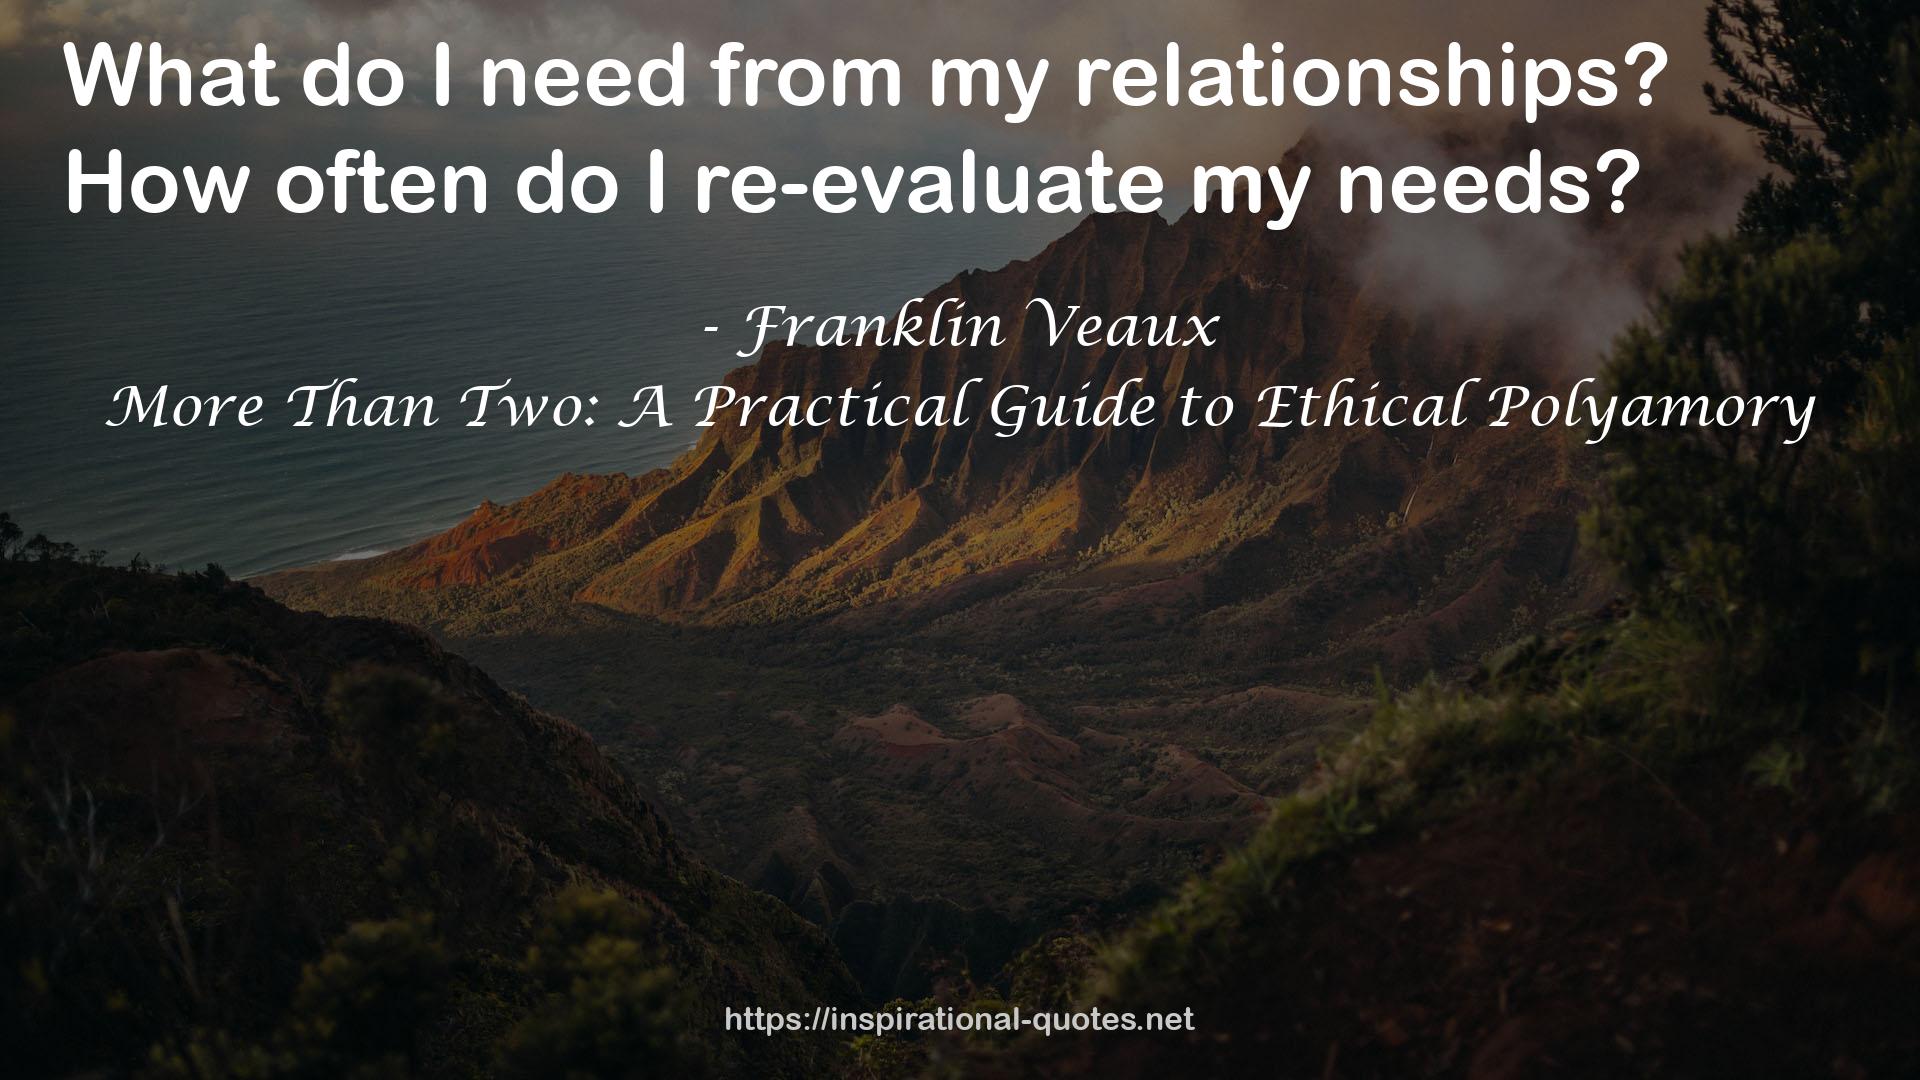 More Than Two: A Practical Guide to Ethical Polyamory QUOTES